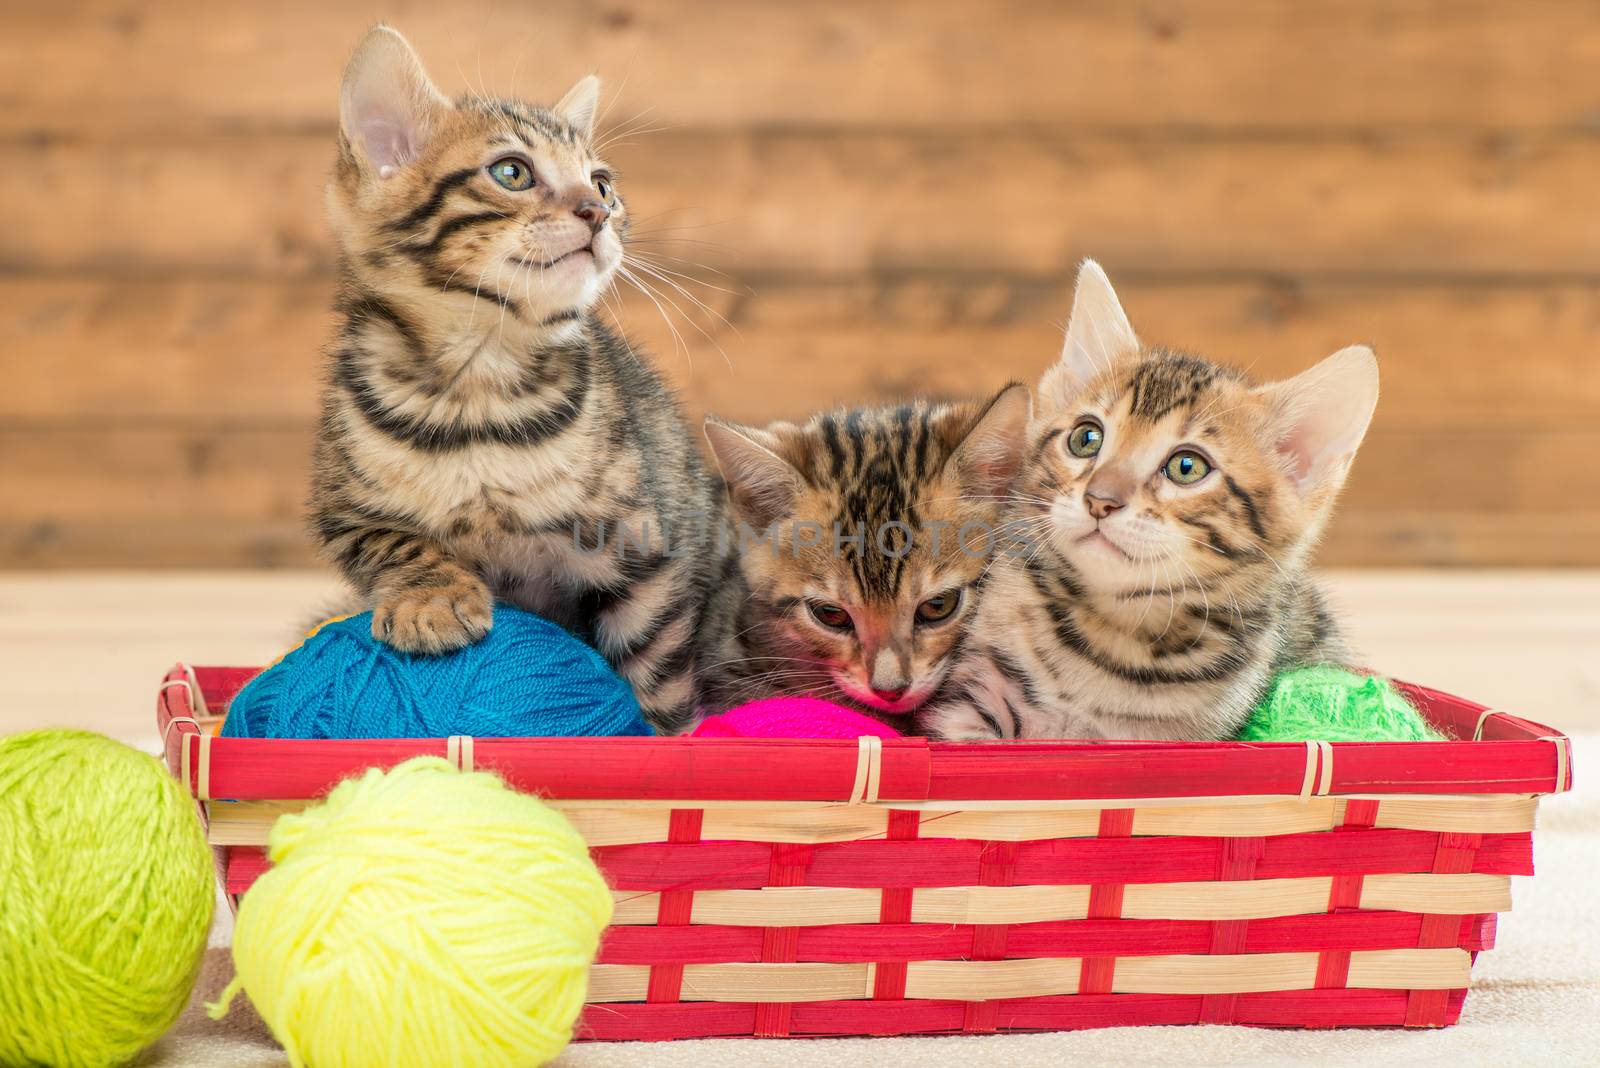 in the wicker basket sit three kittens of the Bengal breed playing with threads